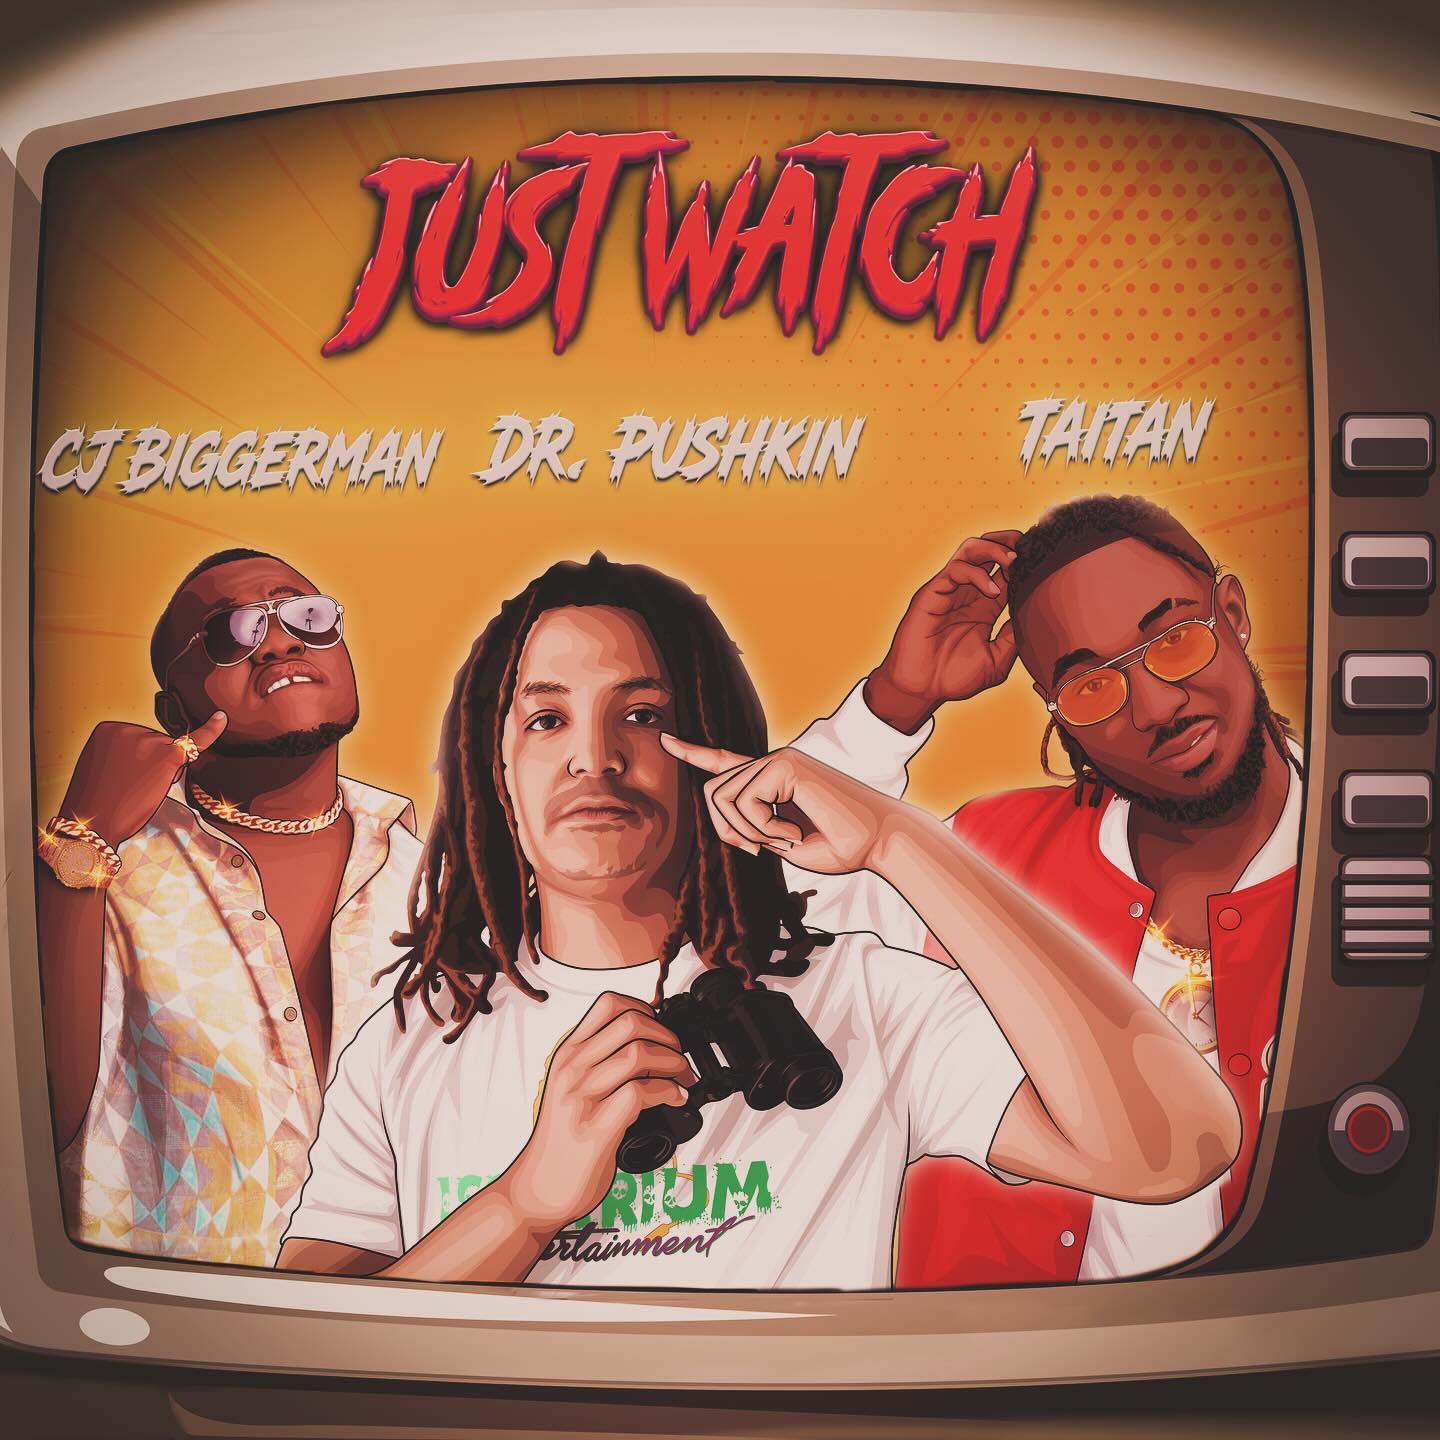 Cover art for Just Watch by Dr Pushkin featuring CJ Biggerman and Taitan